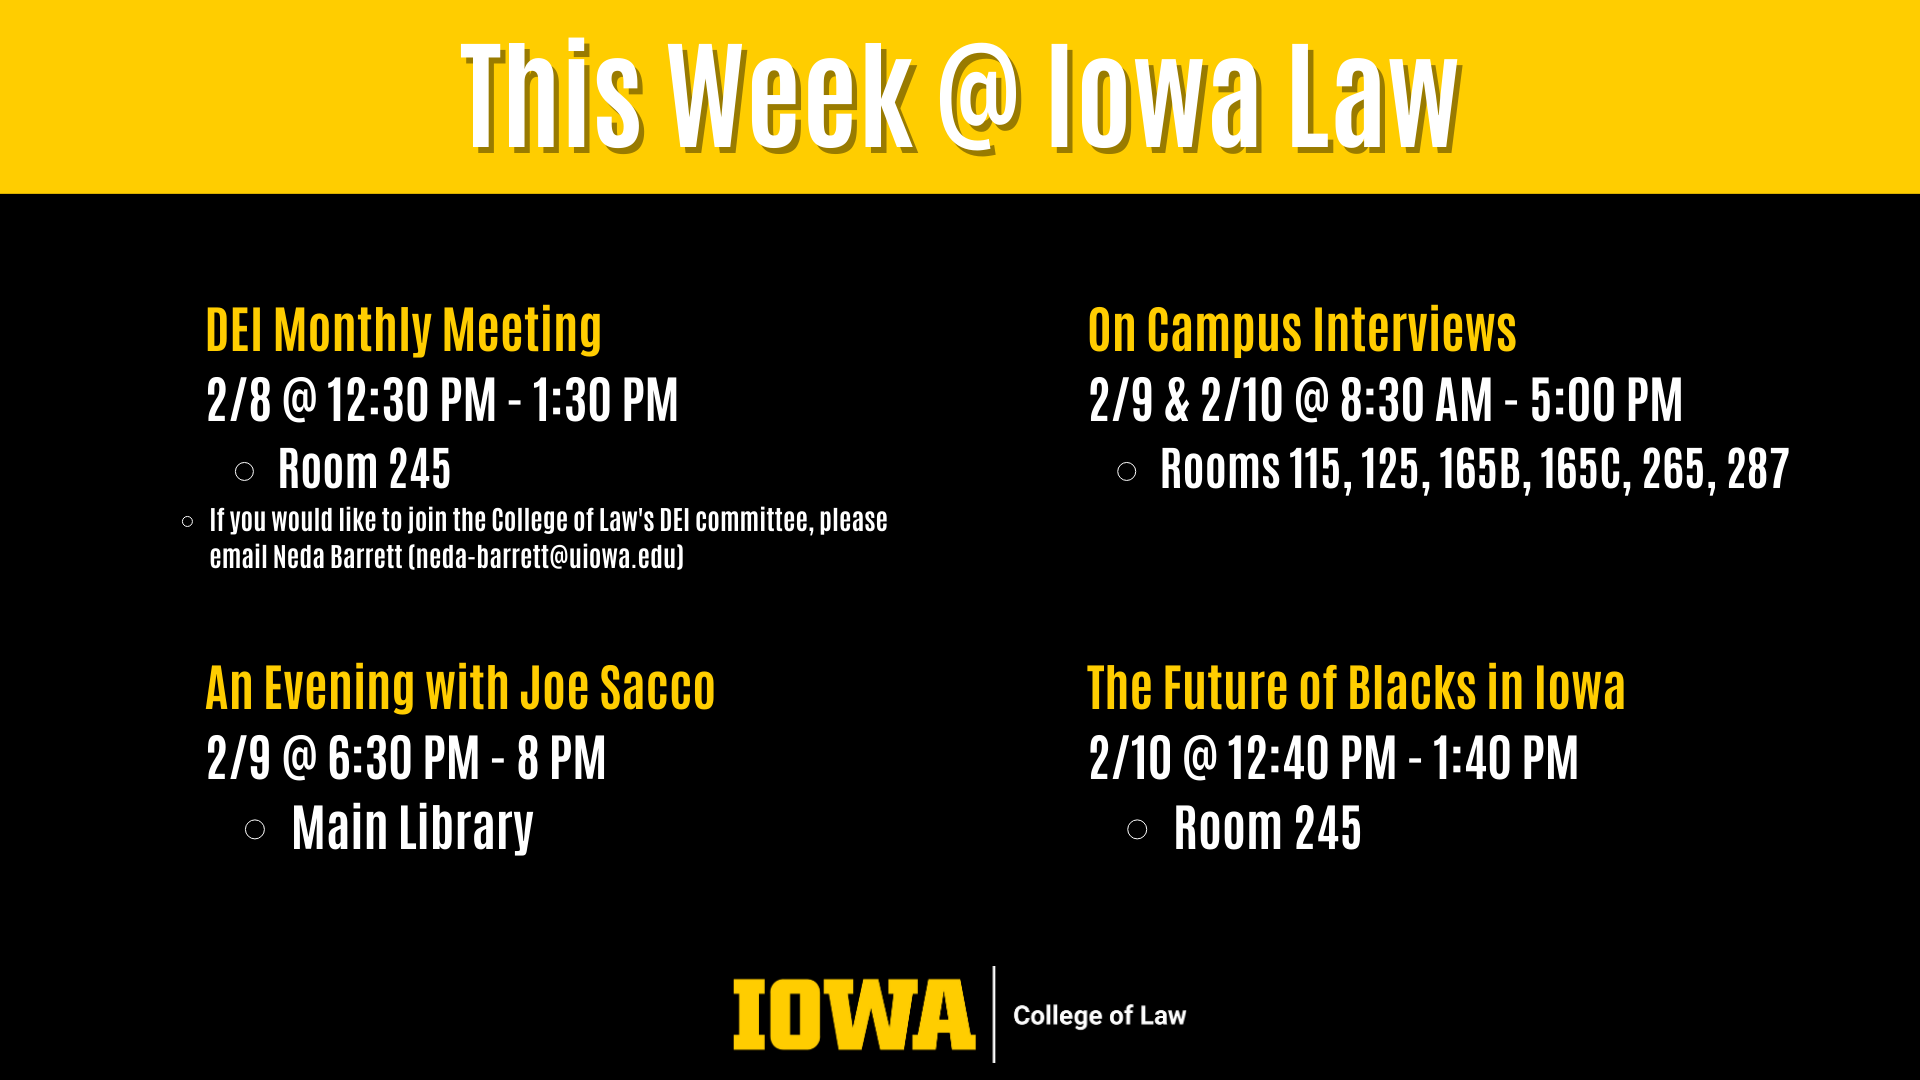 This Week @ Iowa Law On Campus Interviews  2/9 & 2/10 @ 8:30 AM - 5:00 PM  Rooms 115, 125, 165B, 165C, 265, 287 An Evening with Joe Sacco 2/9 @ 6:30 PM - 8 PM Main Library DEI Monthly Meeting 2/8 @ 12:30 PM - 1:30 PM Room 245  If you would like to join the College of Law's DEI committee, please email Neda Barrett (neda-barrett@uiowa.edu) The Future of Blacks in Iowa 2/10 @ 12:40 PM - 1:40 PM Room 245